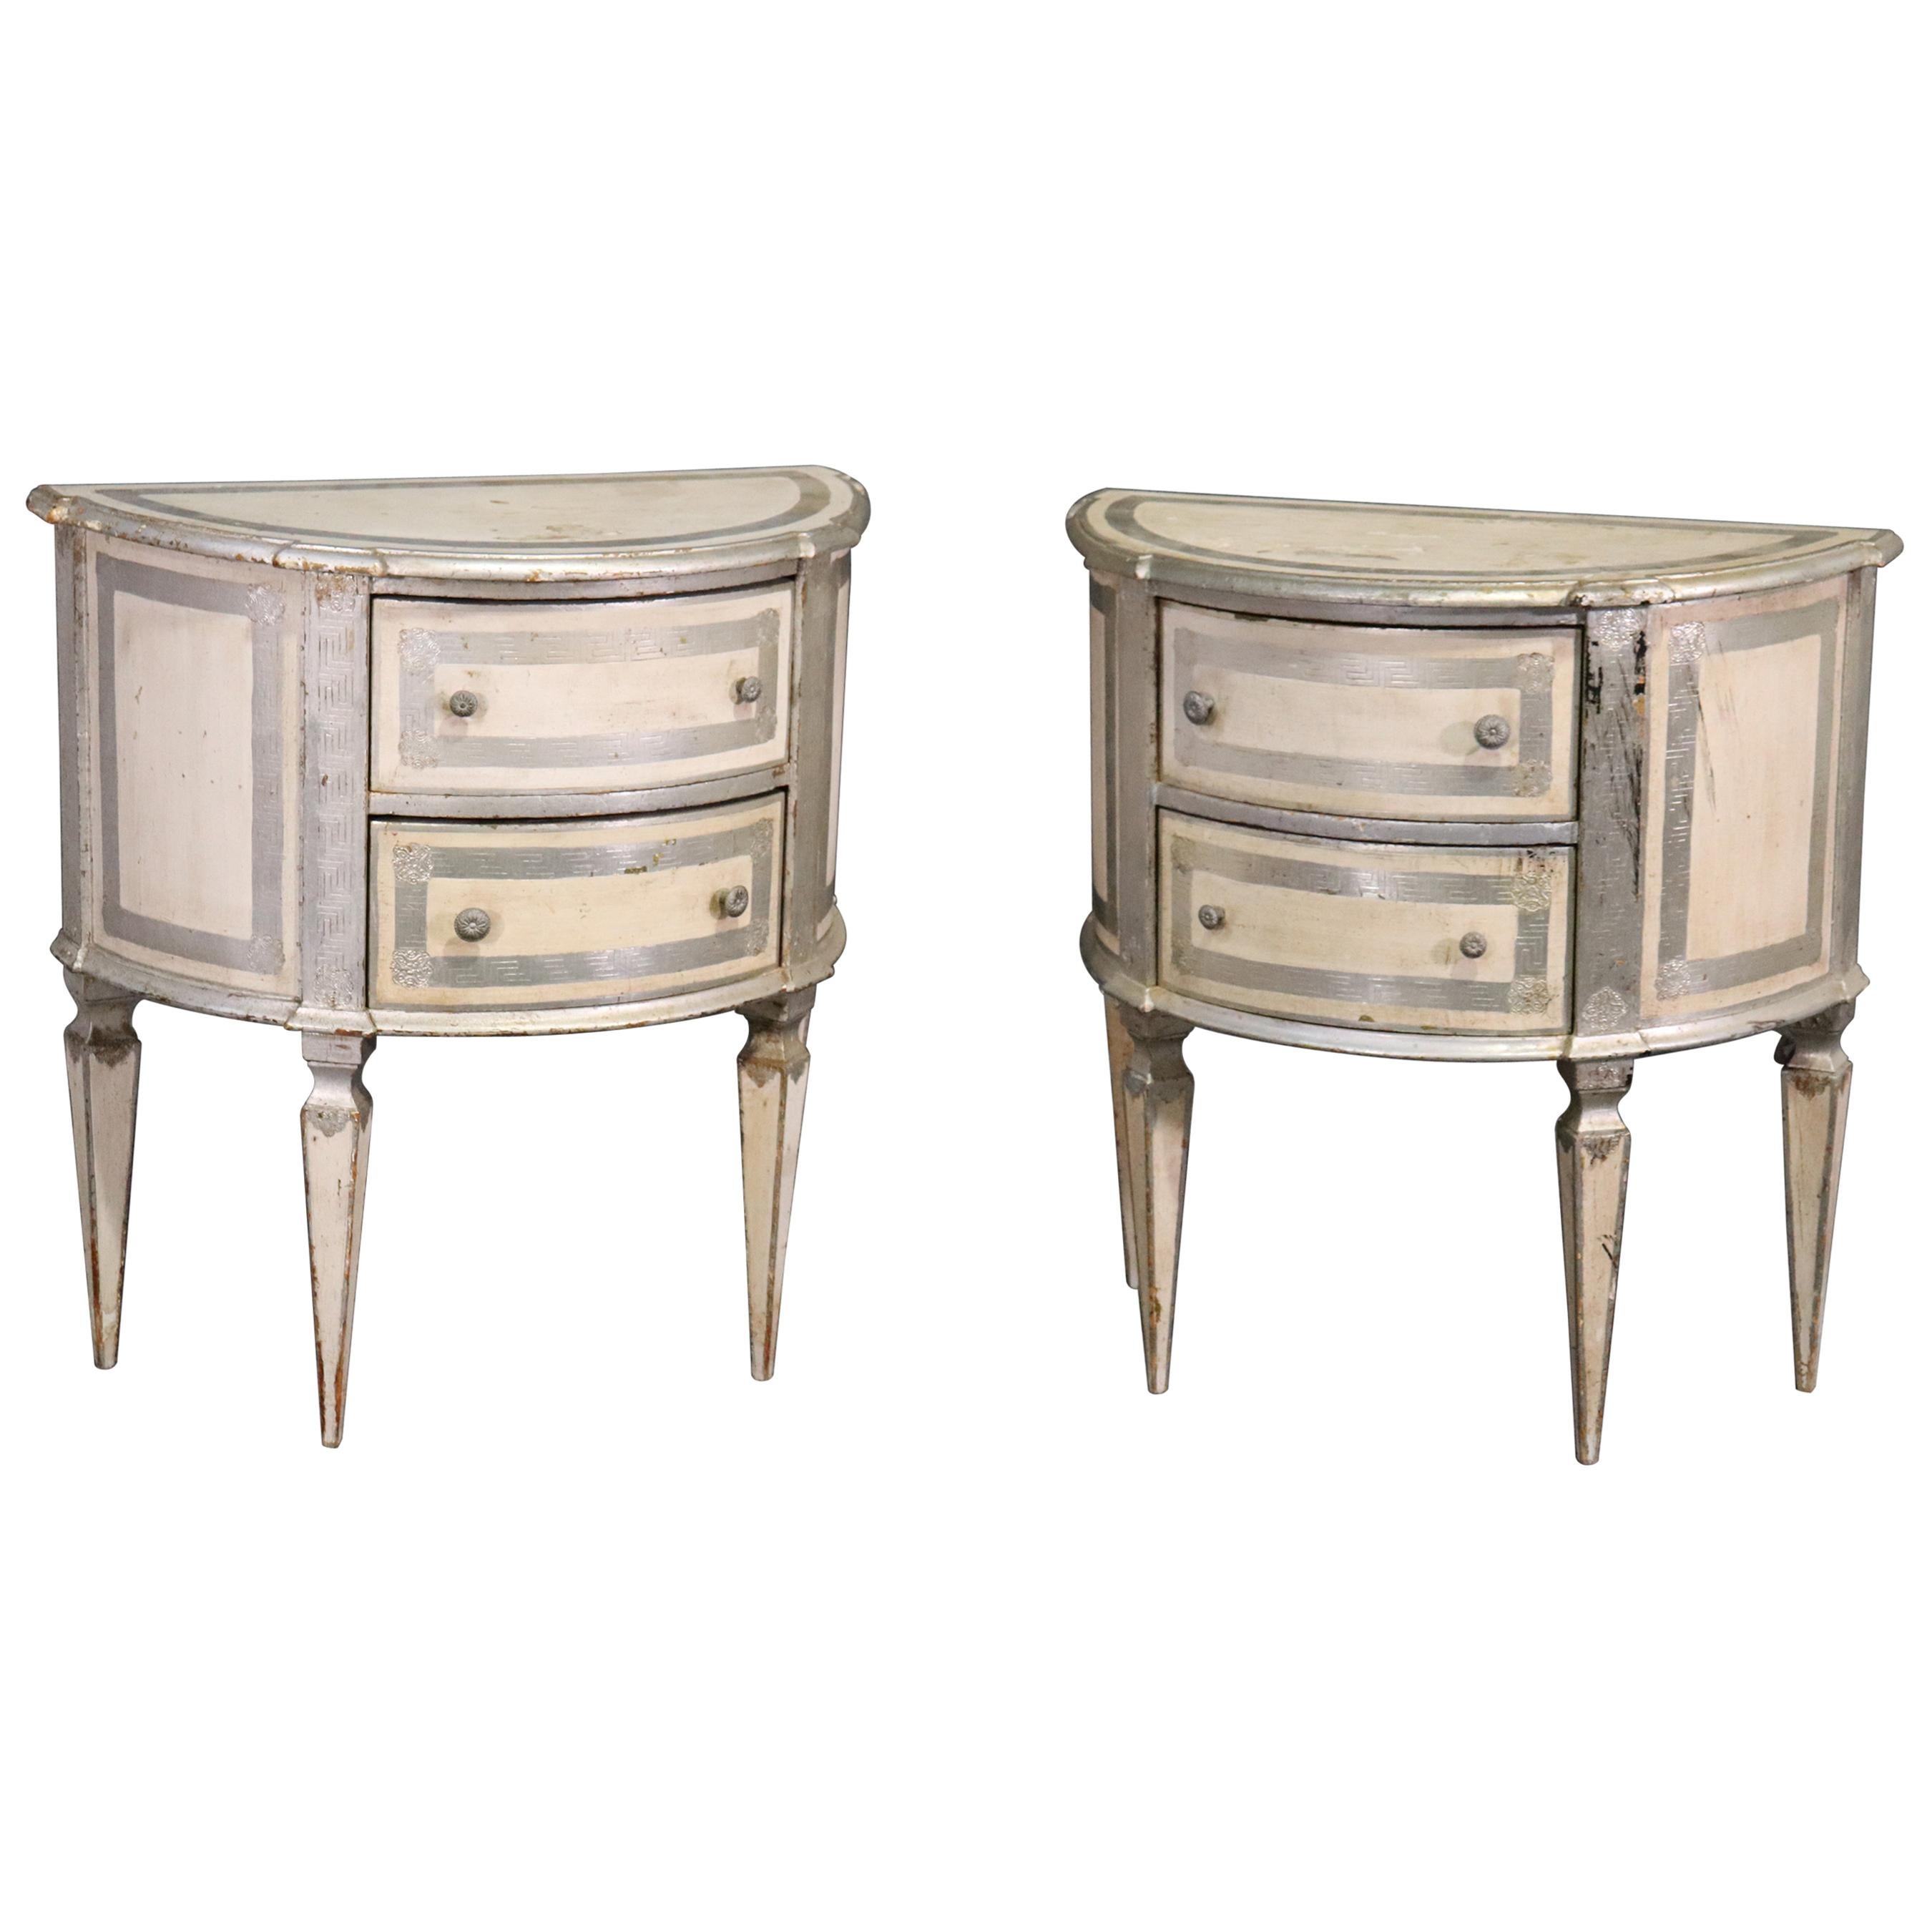 Italian Florentine Demilune Nightstands Commodes in Silver Leaf and White, Pair